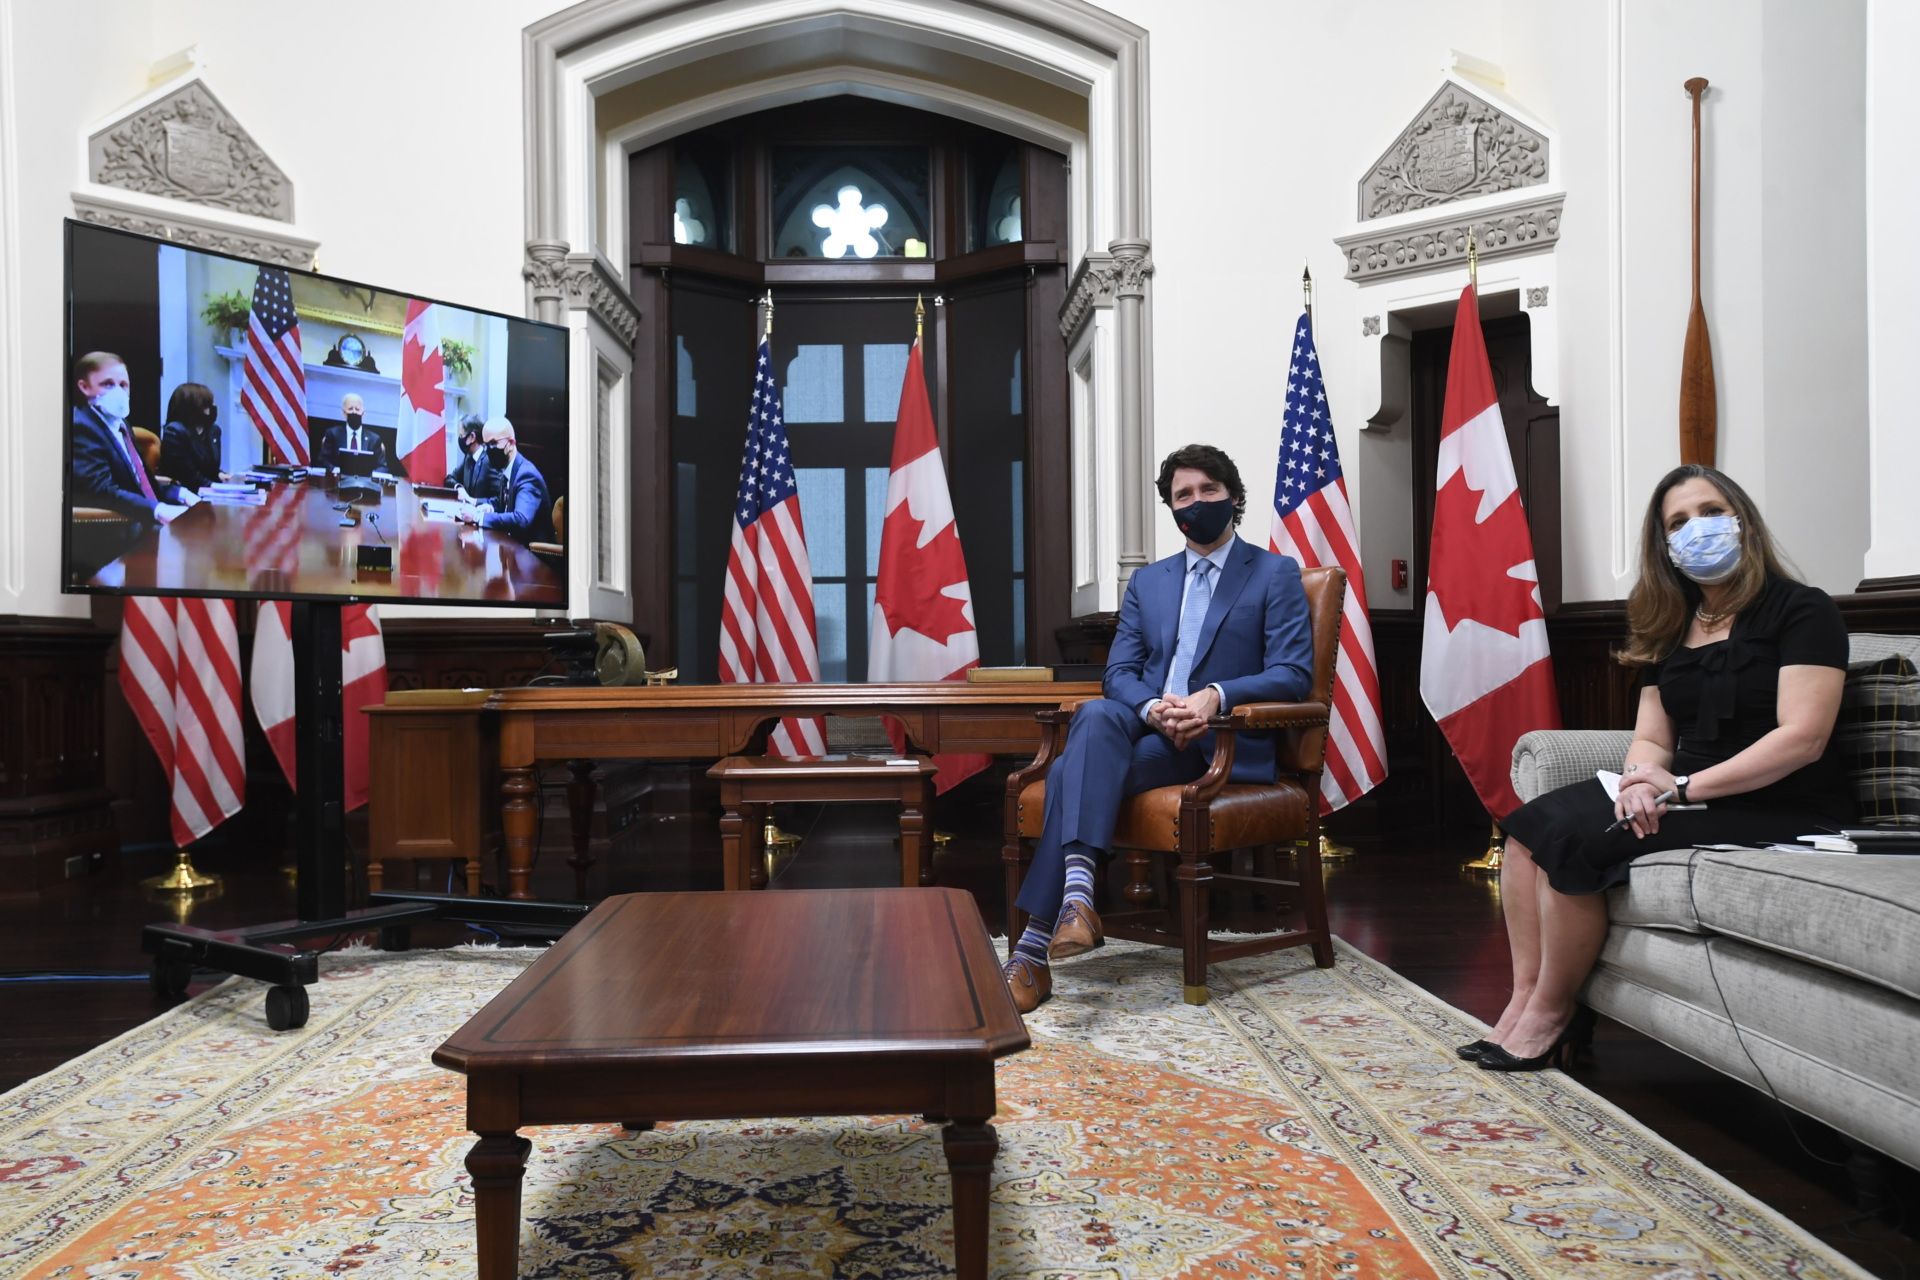 Justin Trudeau, Canada's prime minister, and Chrystia Freeland, Canada's deputy prime minister and minister of finance, attend a virtual meeting with U.S. President Joe Biden in Ottawa, Ontario, Canada, on Tuesday, Feb. 23, 2021. Biden will seek to repair relations with Canada that have been strained by disputes over trade and an oil pipeline as he meets virtually with Trudeau on Tuesday. Photographer: Adrian Wyld/Canadian Press/Bloomberg via Getty Images